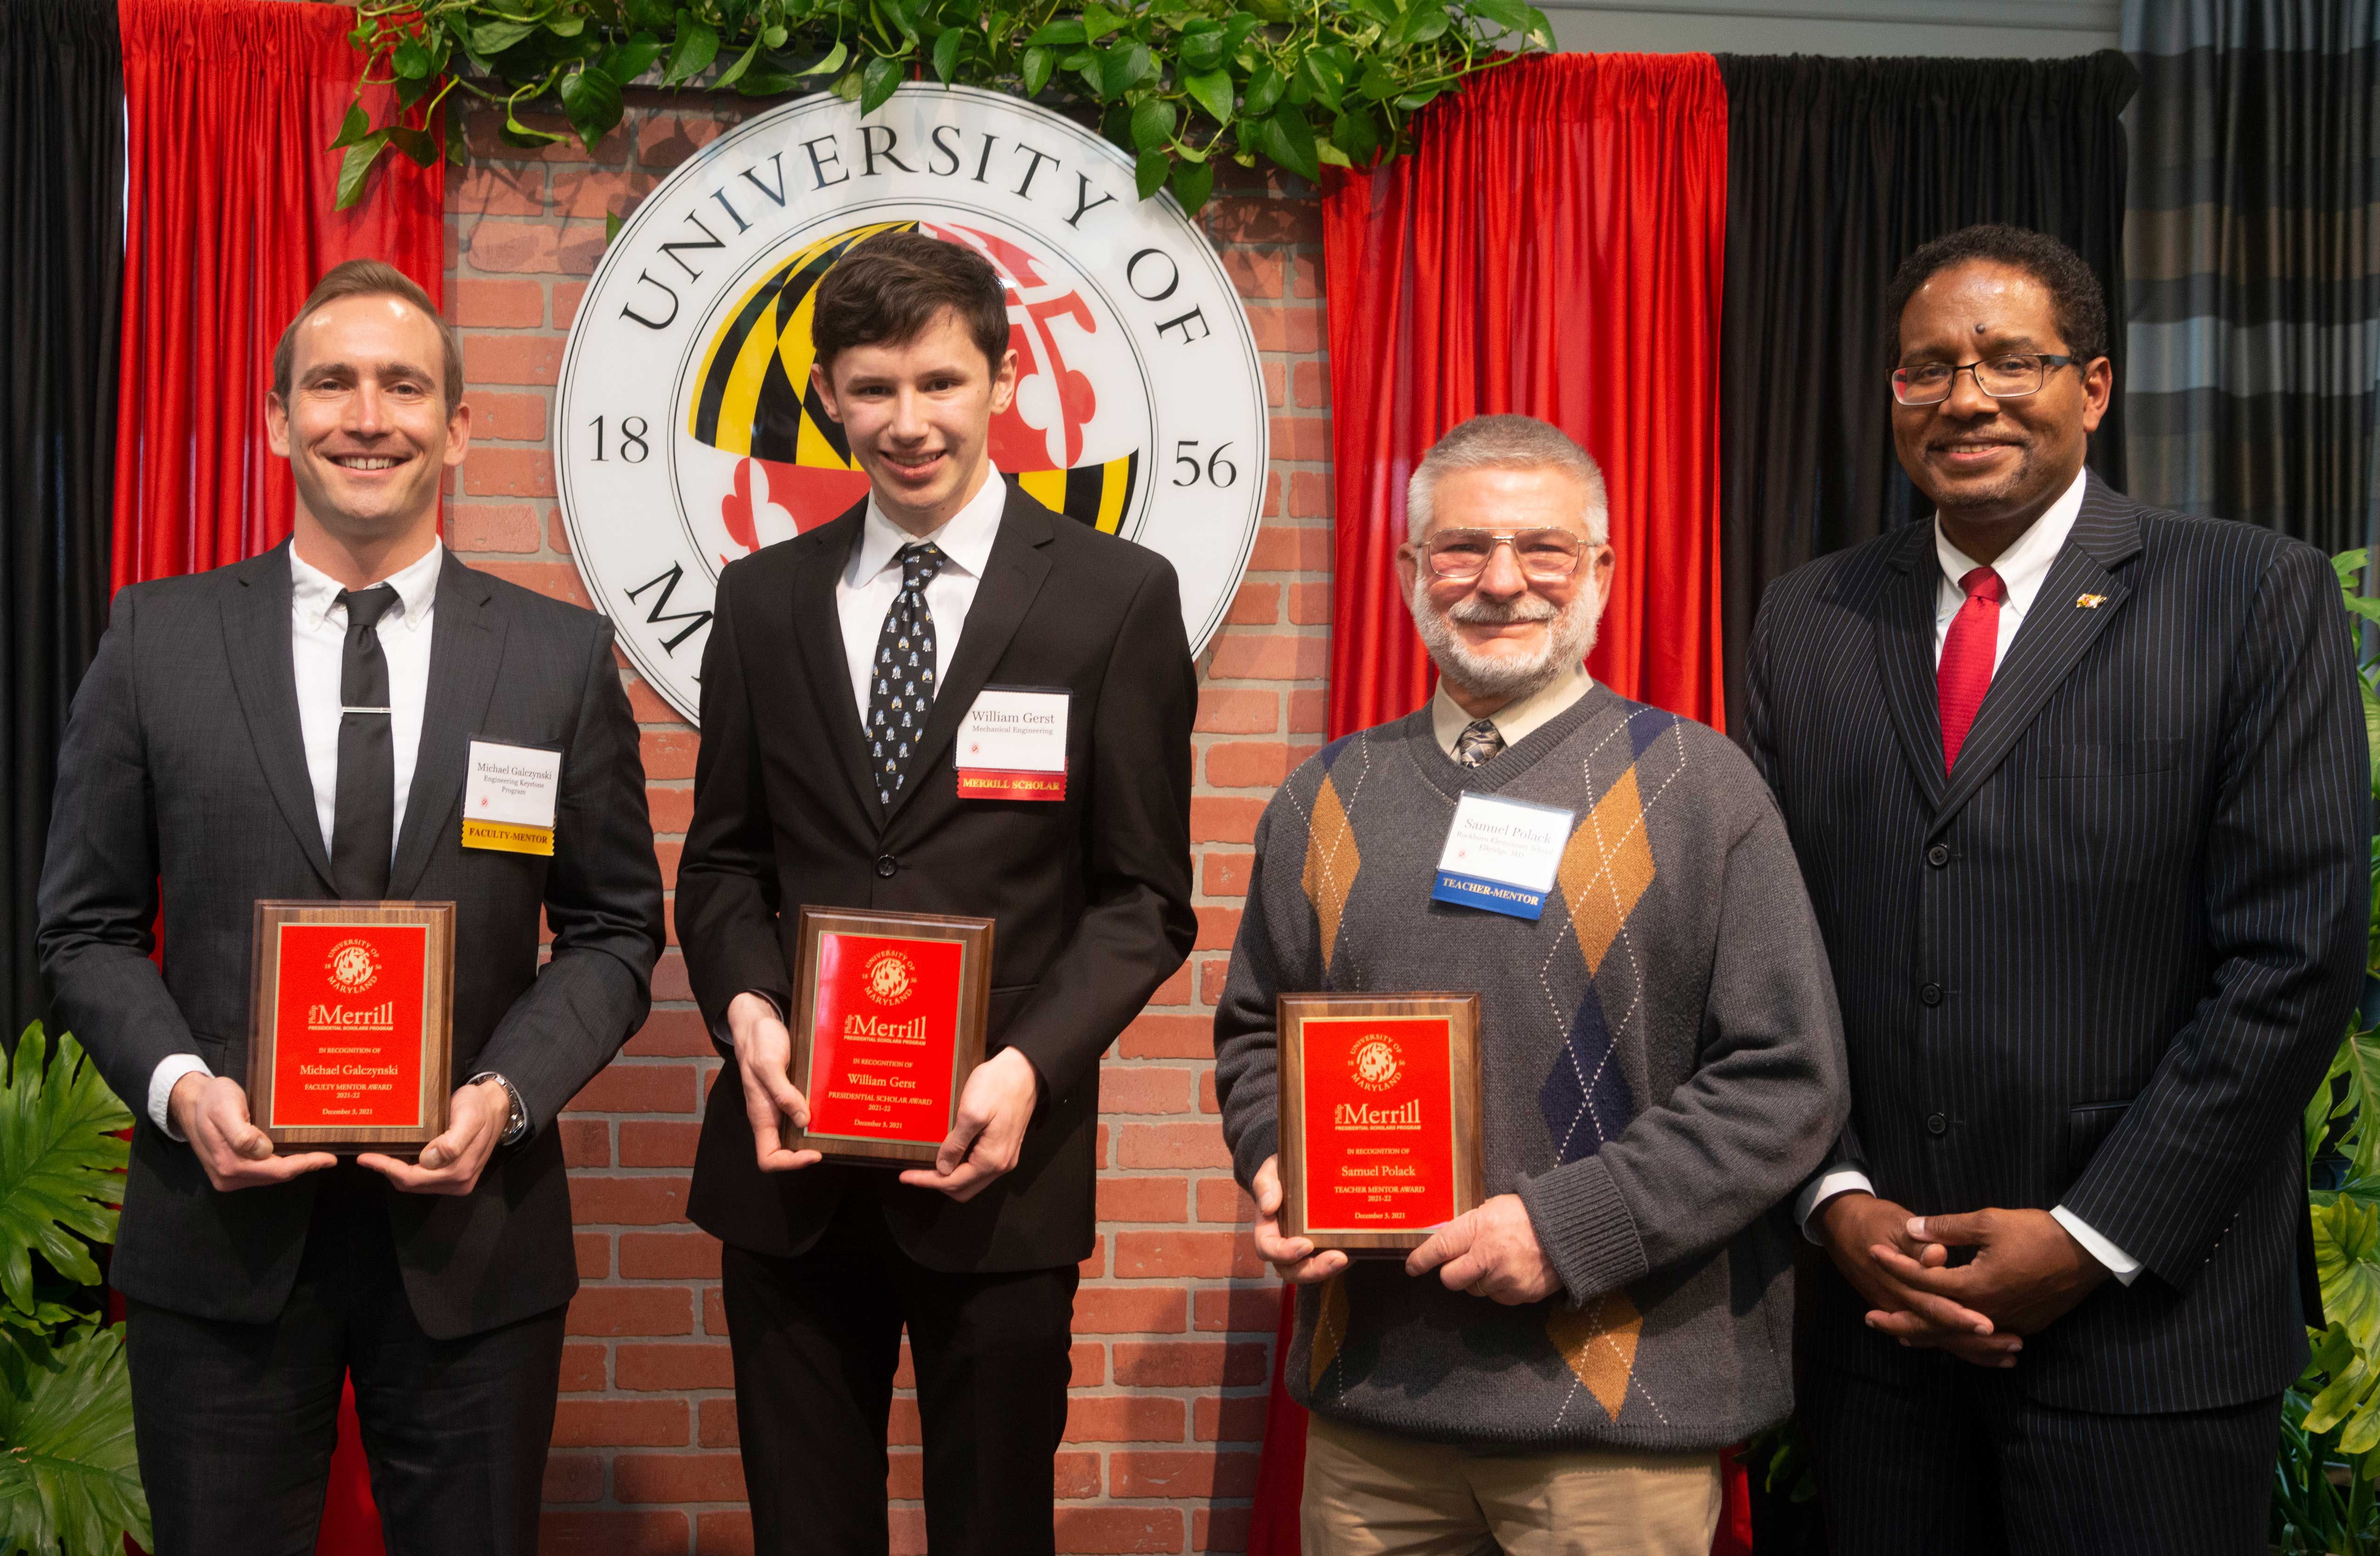 Merrill Scholar William Gerst with mentors and President Pines